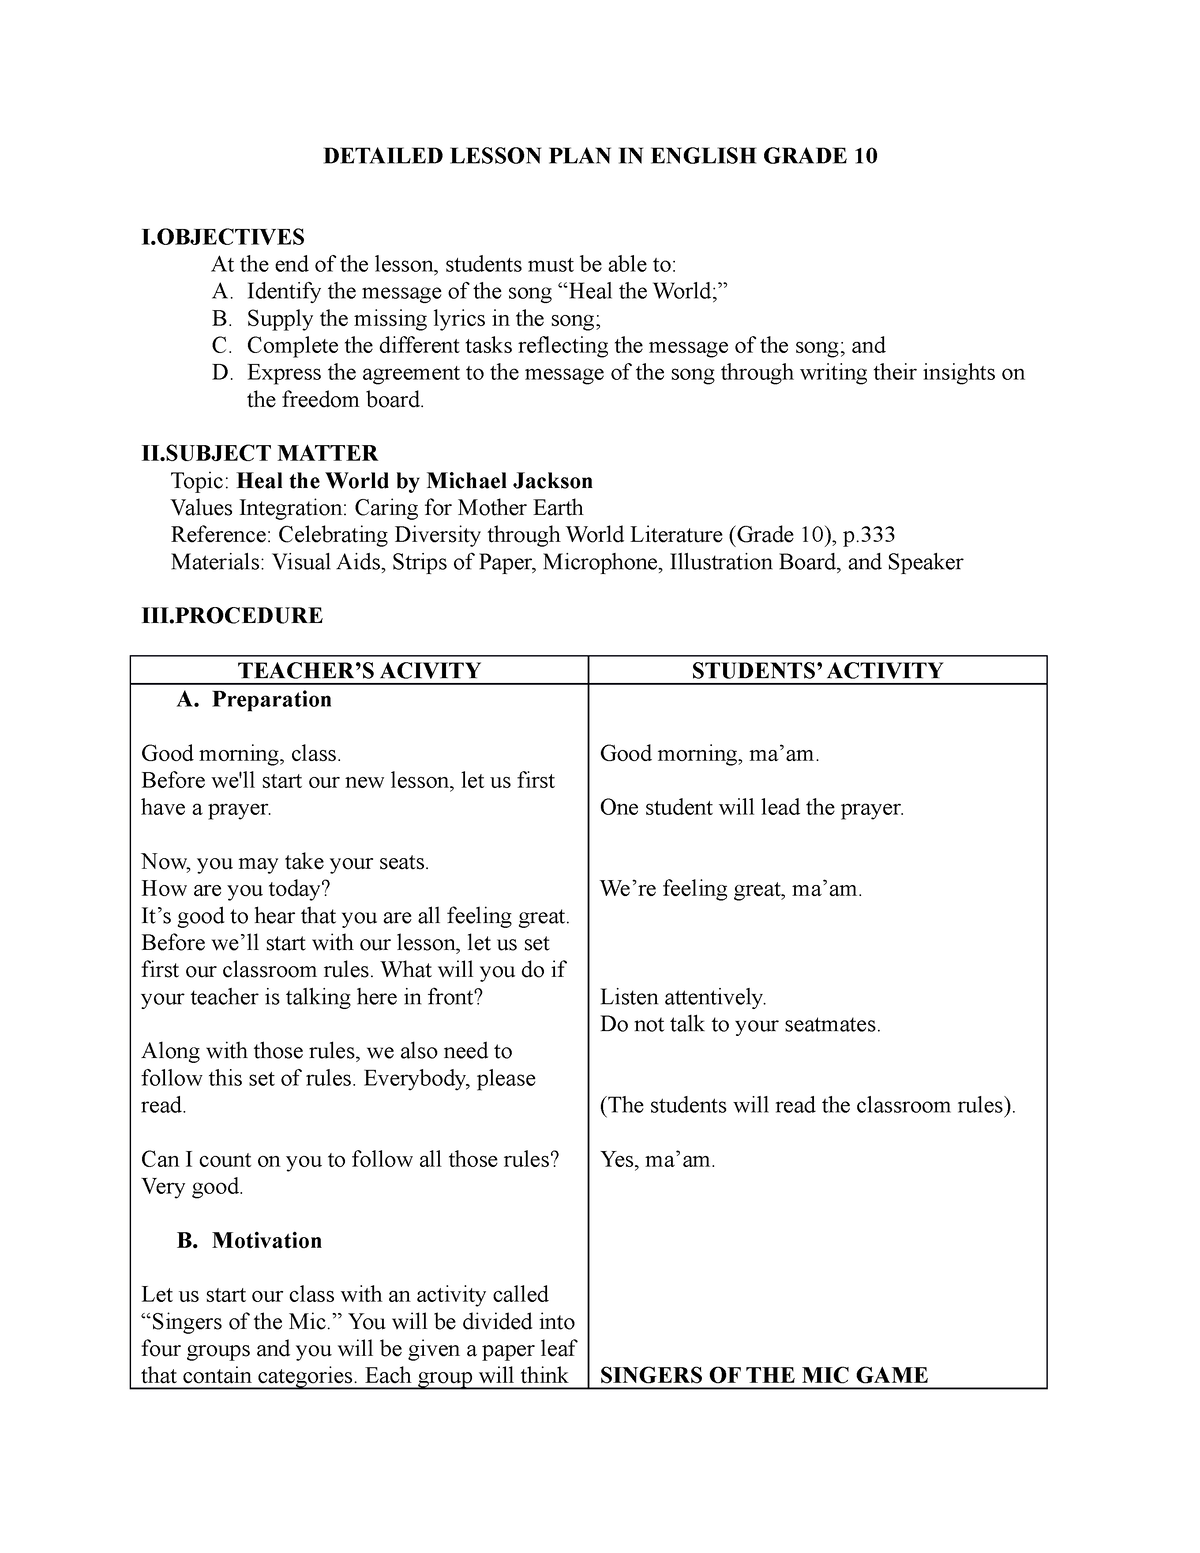 detailed-lesson-plan-in-english-grade-10-detailed-lesson-plan-in